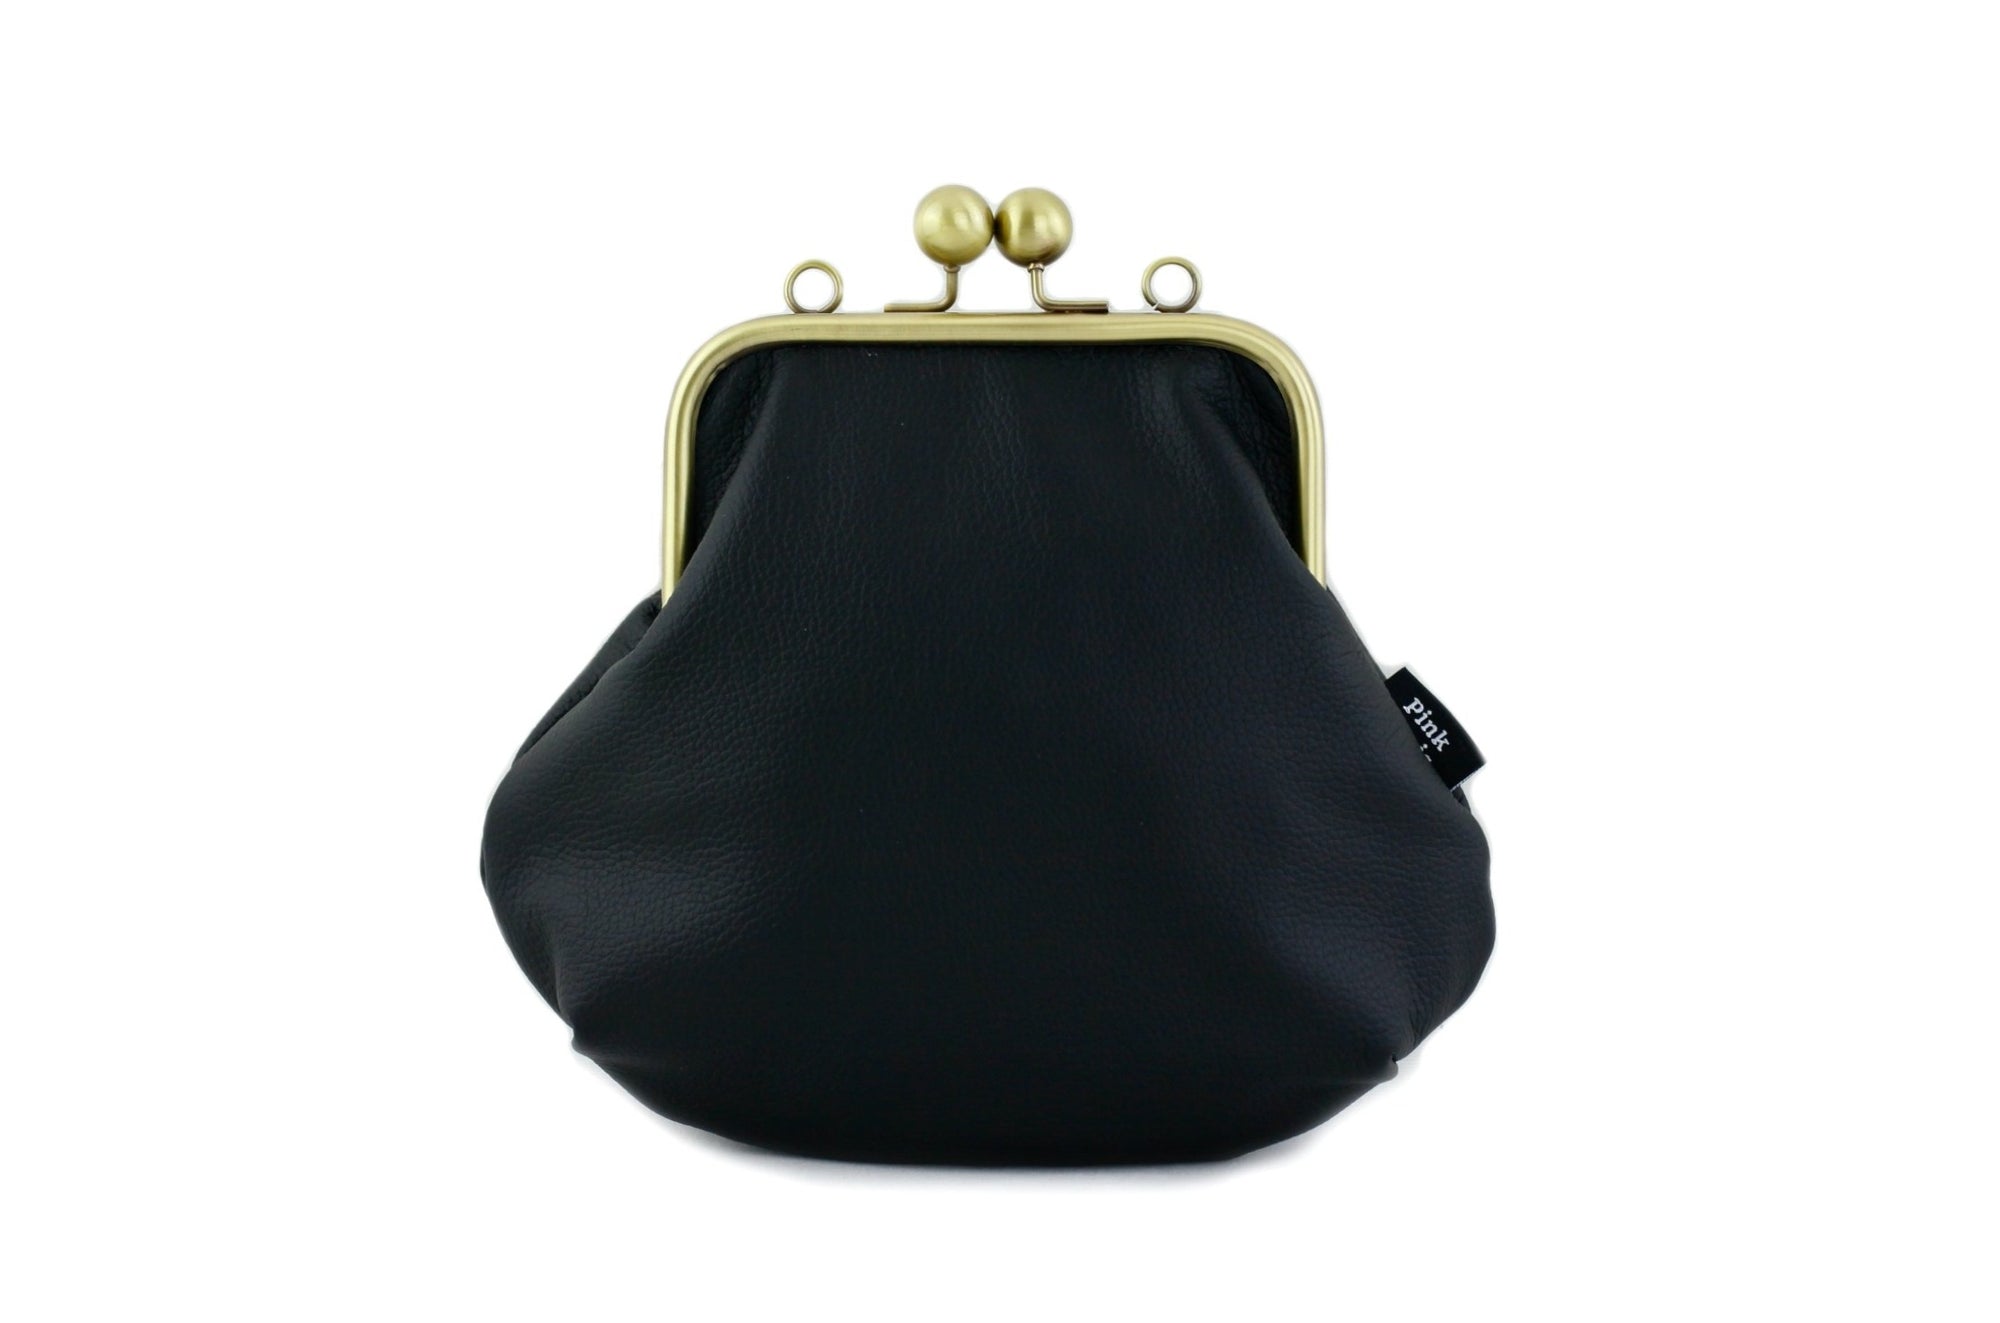 Women's Black Genuine Leather Clutch Bag with Strap | PINKOASIS